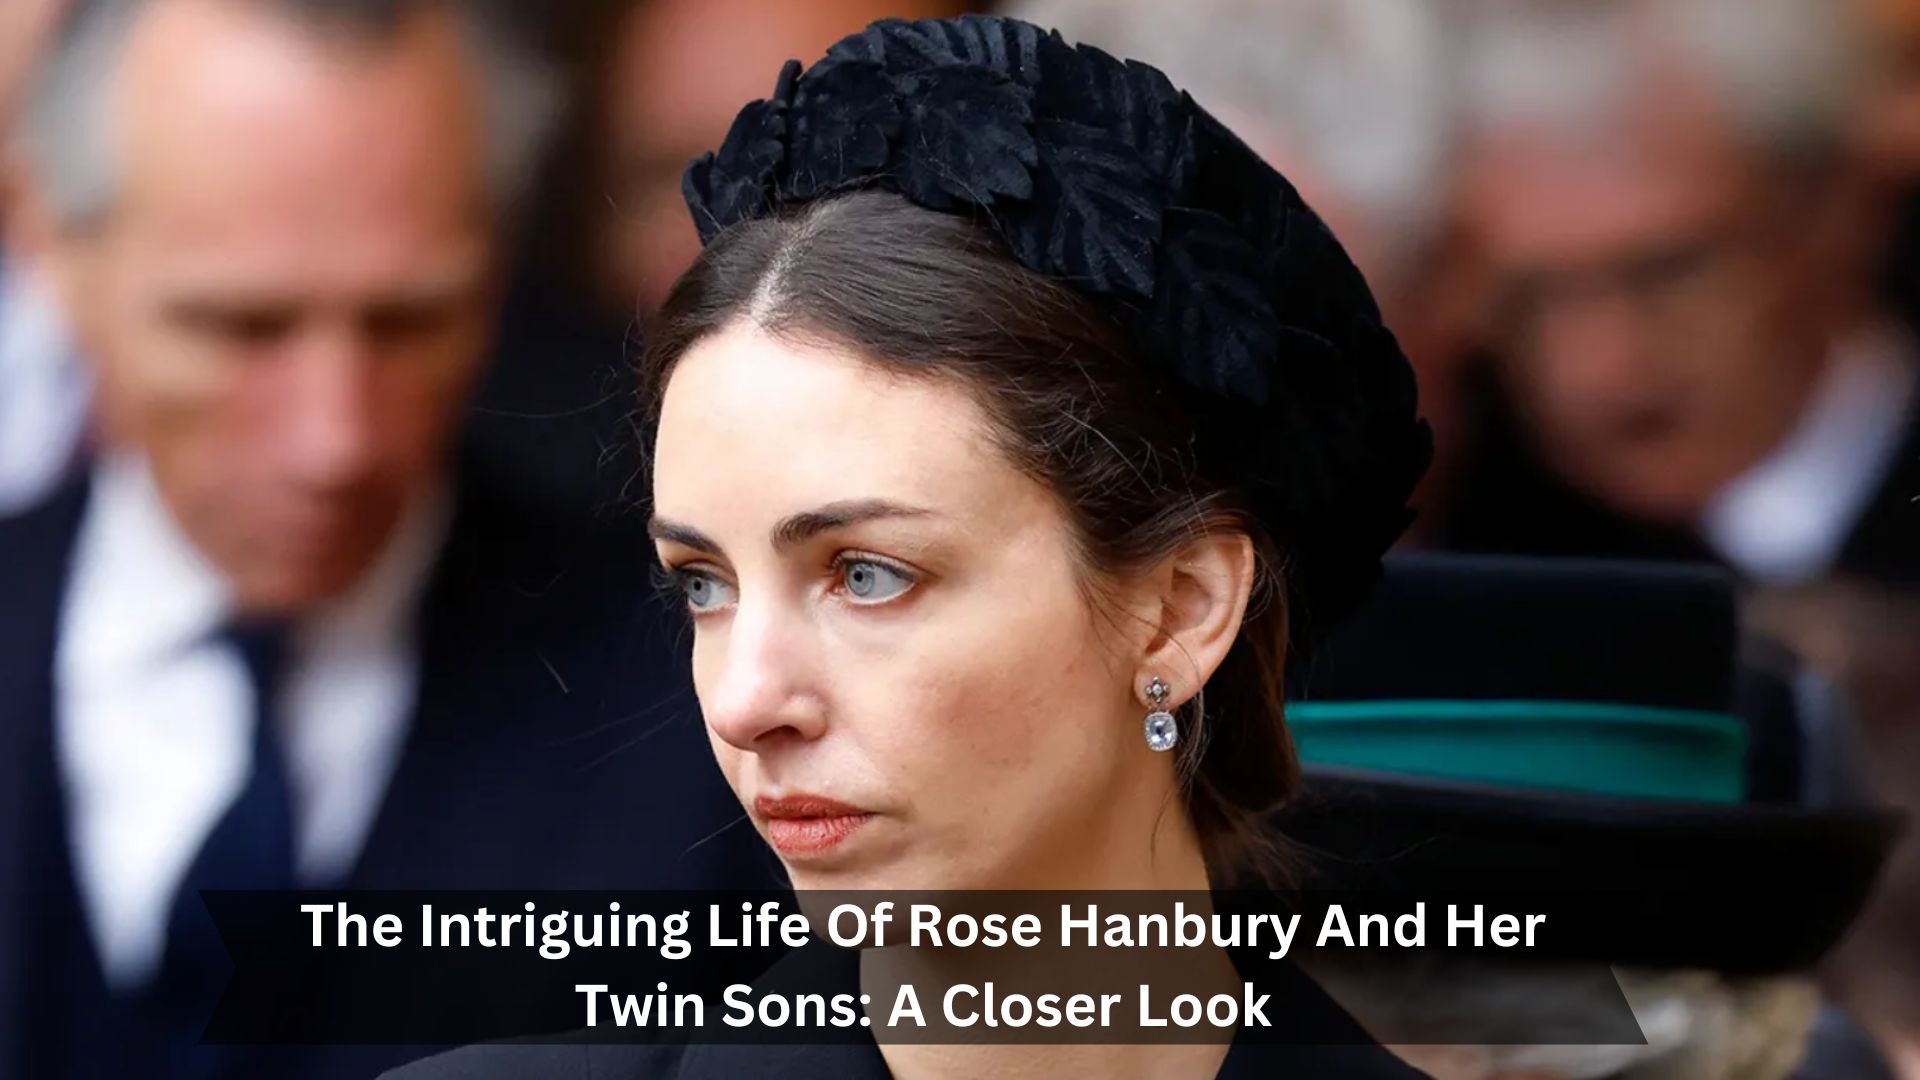 The-Intriguing-Life-Of-Rose-Hanbury-And-Her-Twin-Sons-A-Closer-Look